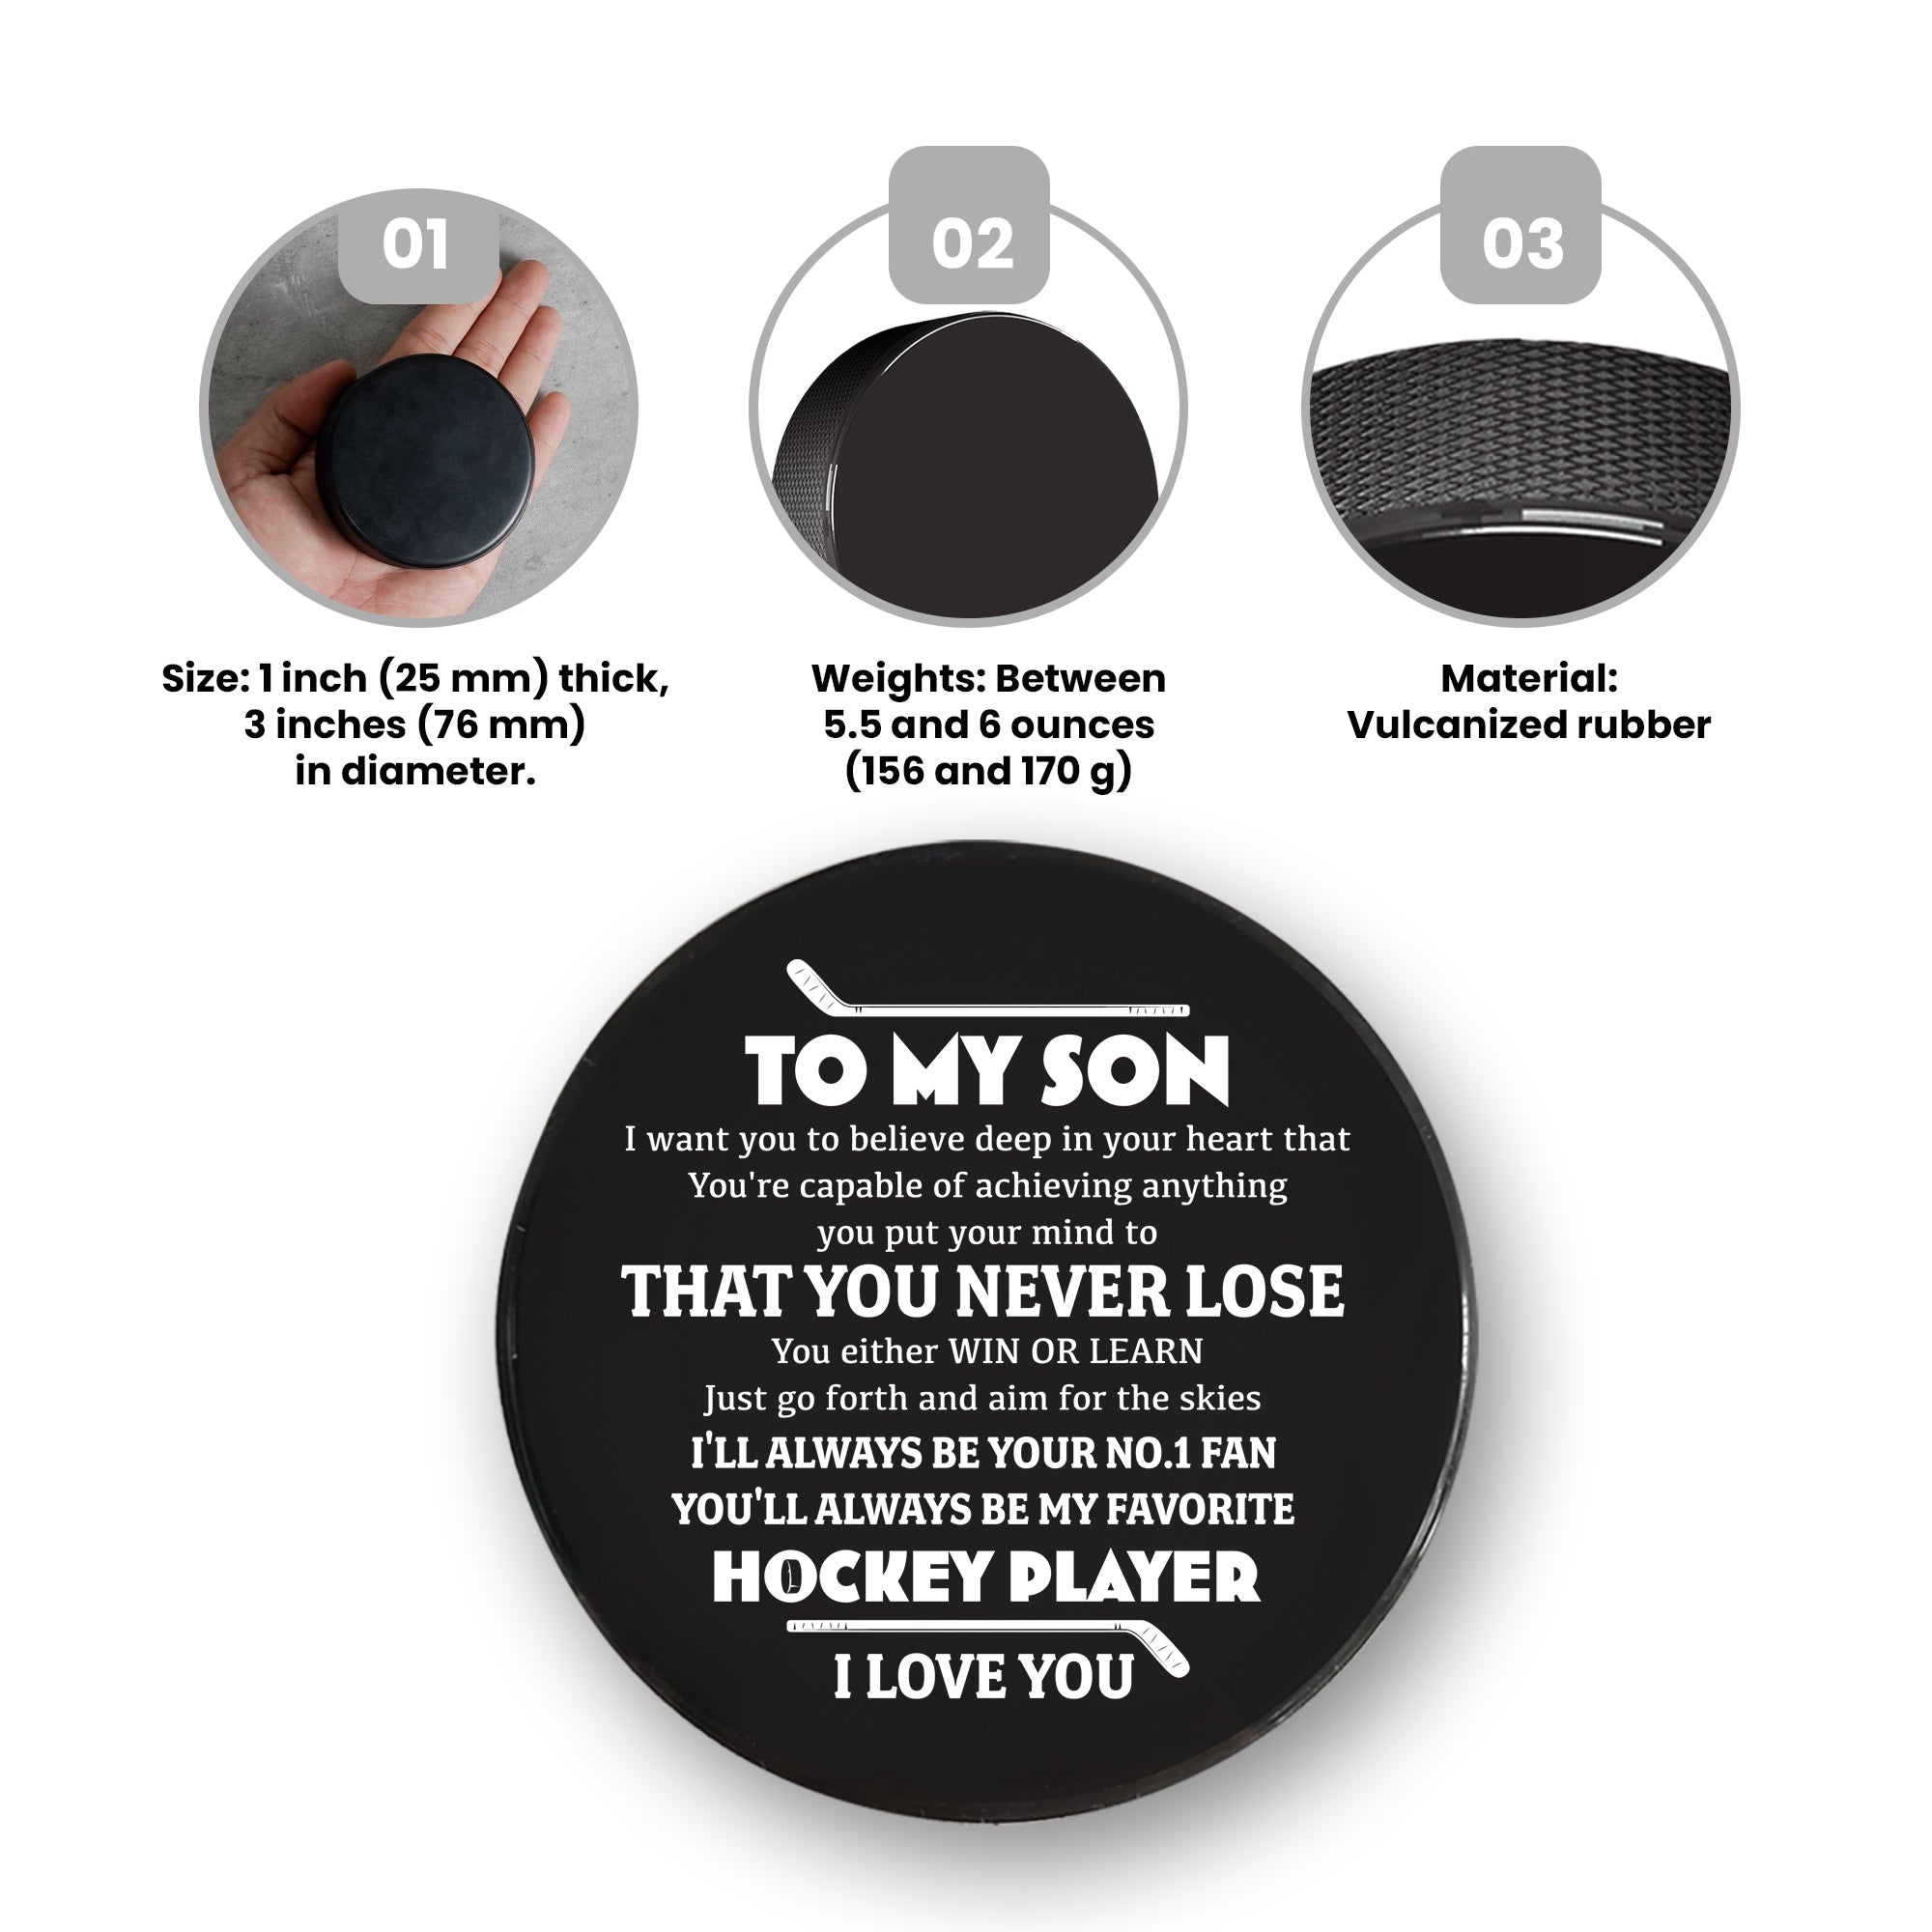 Celebrate Your Special Bond - An Exclusive Custom Hockey Puck for Son - Gai16018